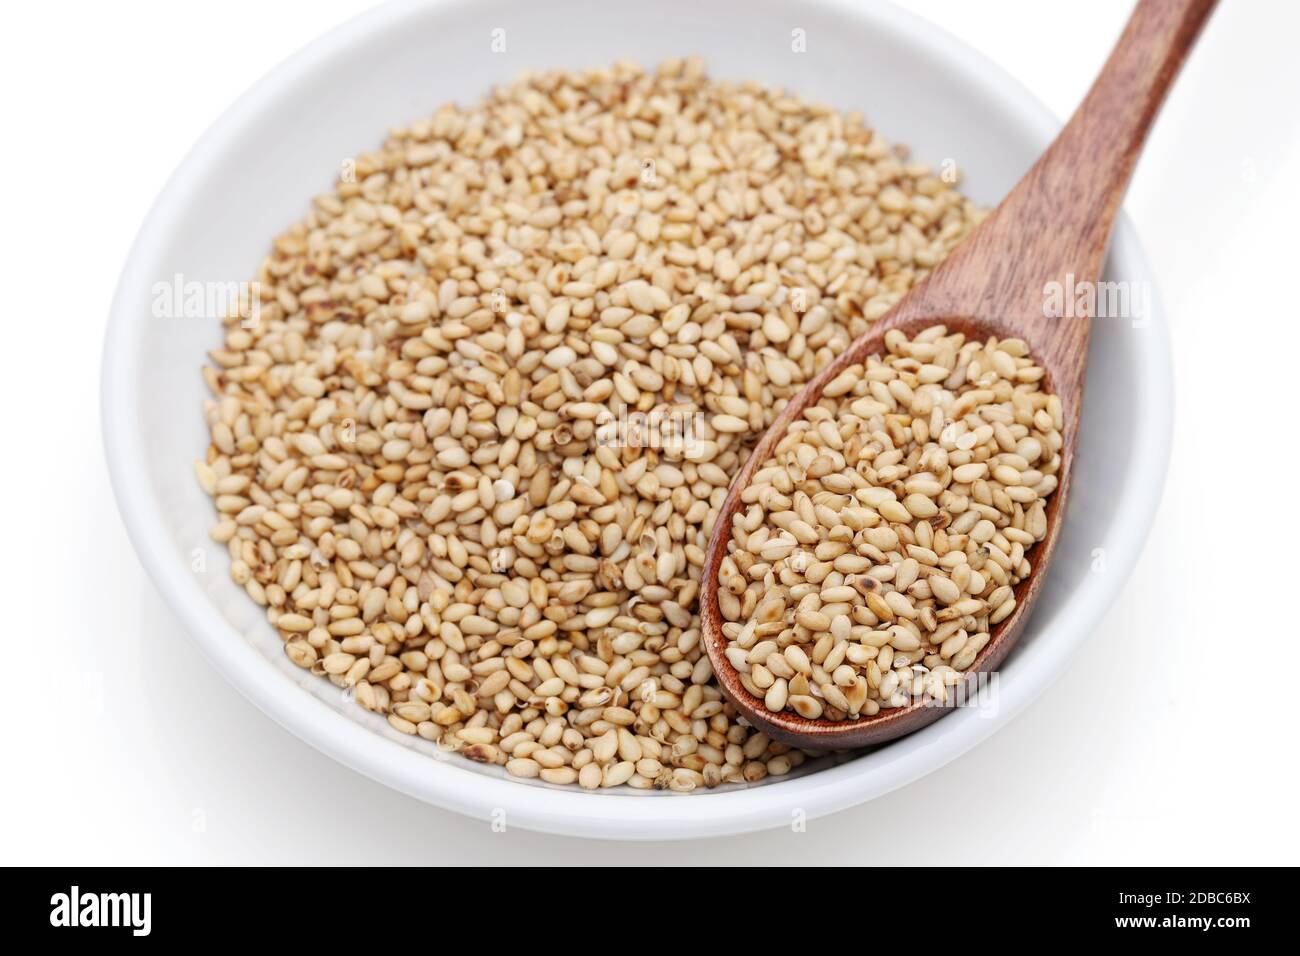 White sesame seeds with wooden spoon in a dish on white background Stock Photo